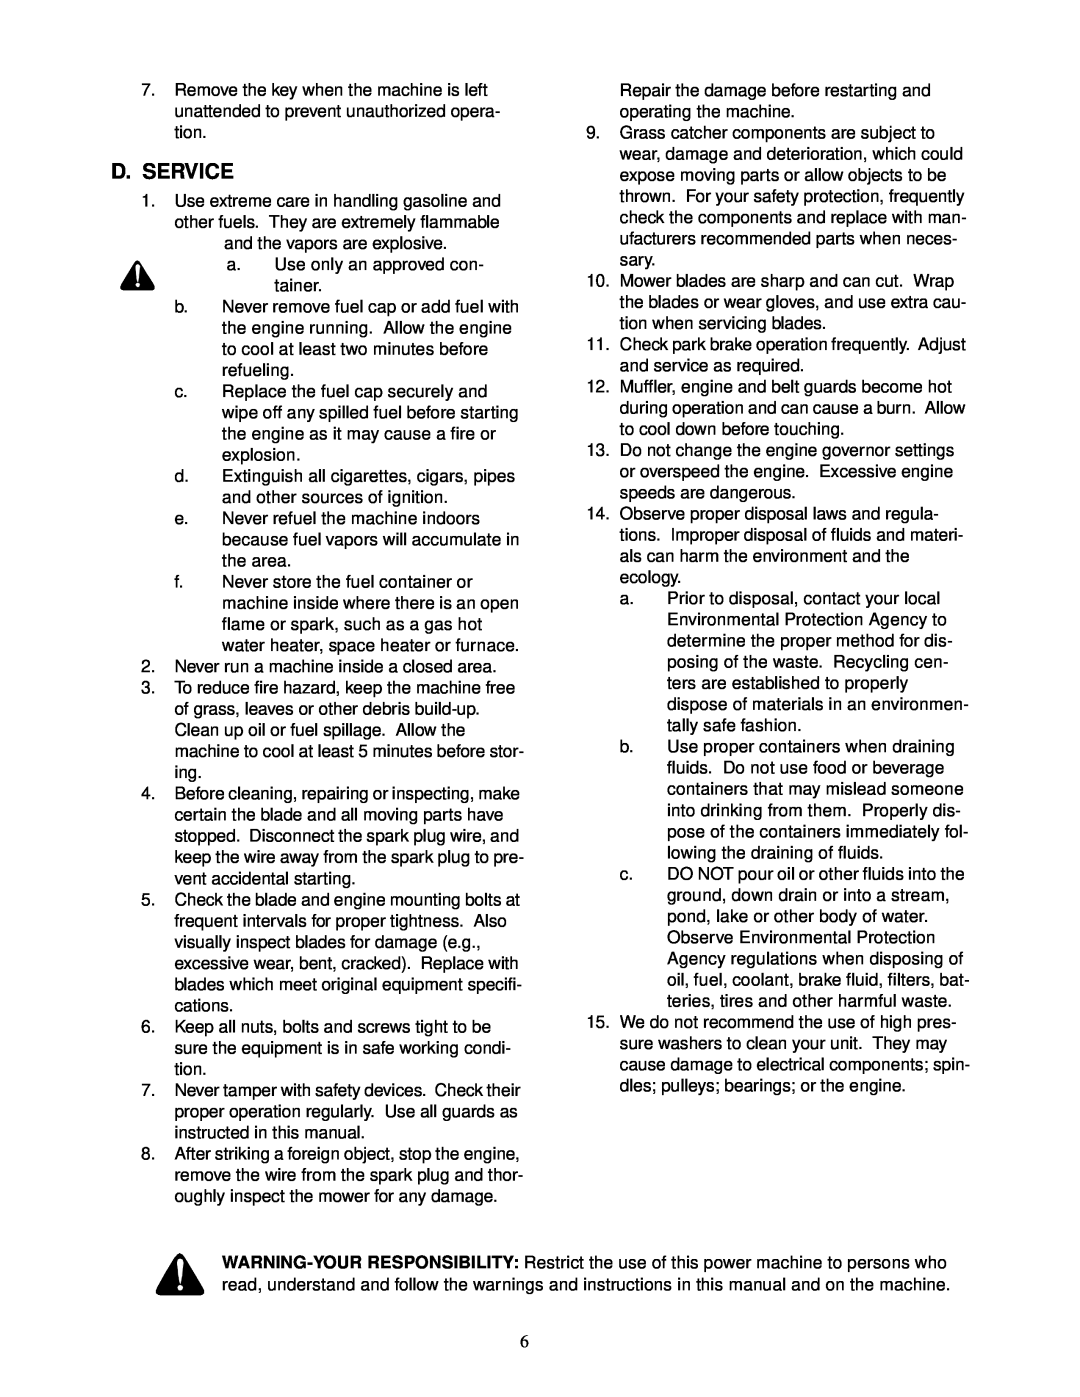 Cub Cadet 23HP Z-Force 50 service manual D. Service, cause damage to electrical components spin 